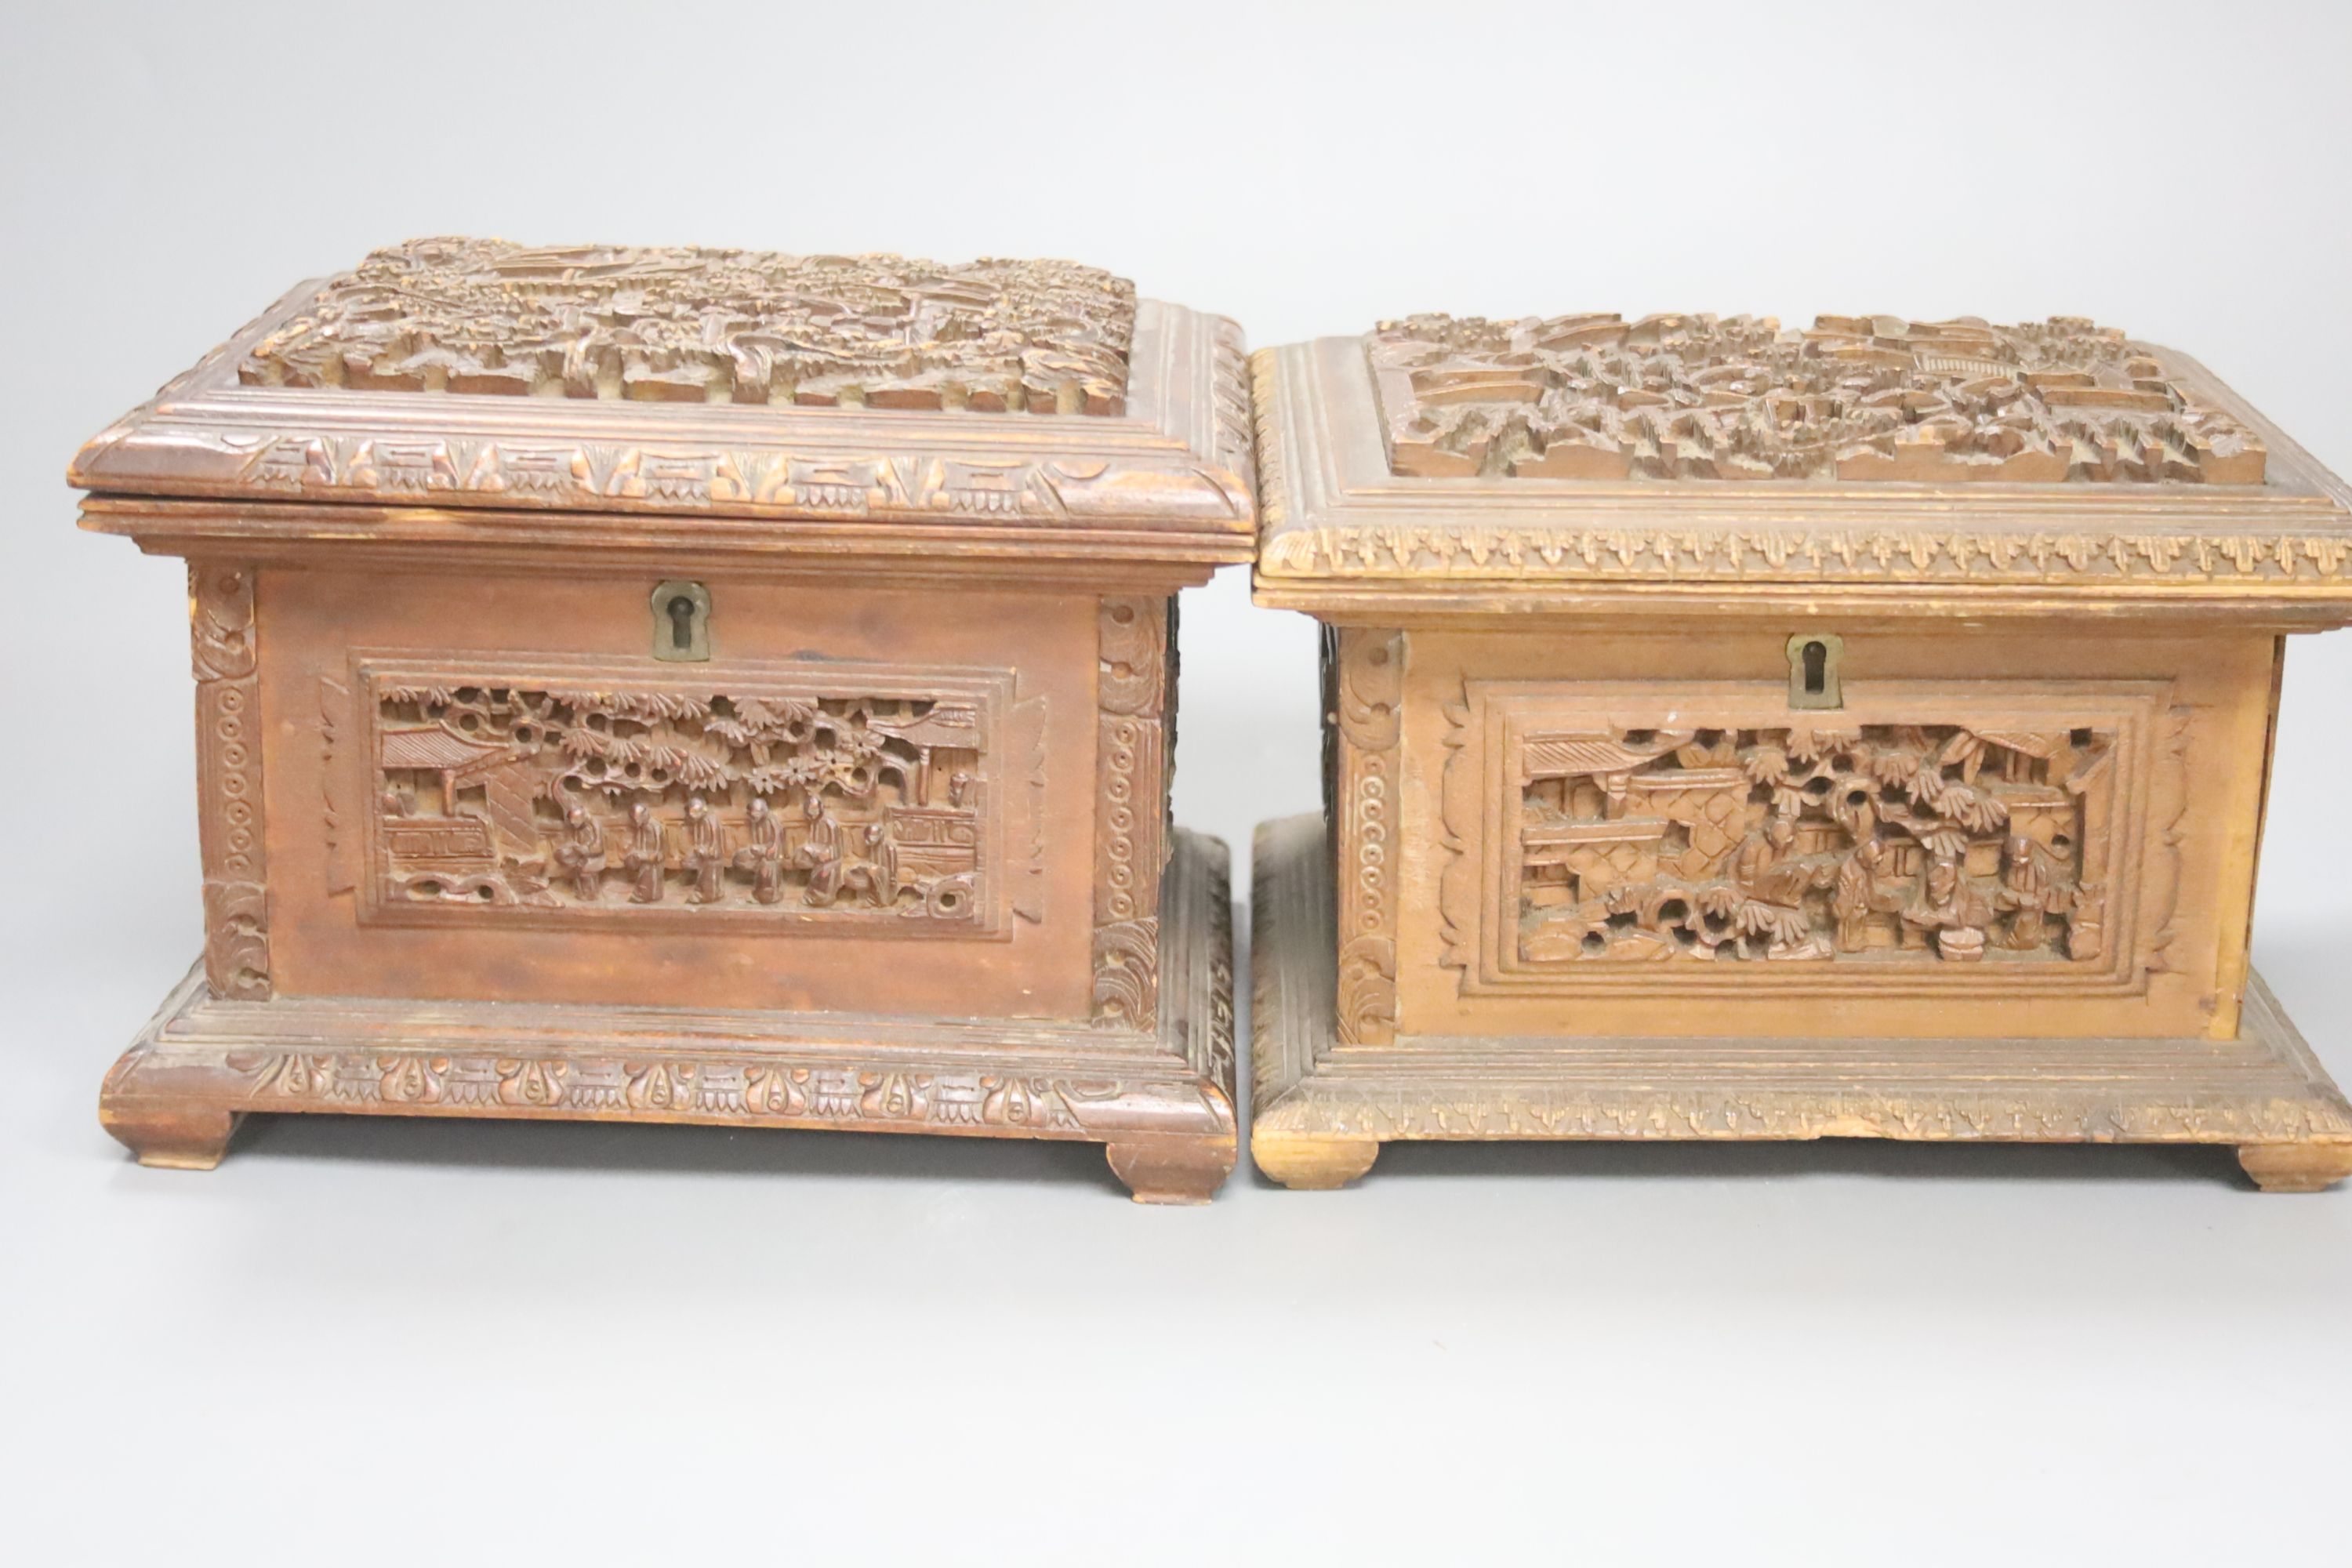 Three Chinese carved hardwood caskets, largest 19 x 15cm 13cm high